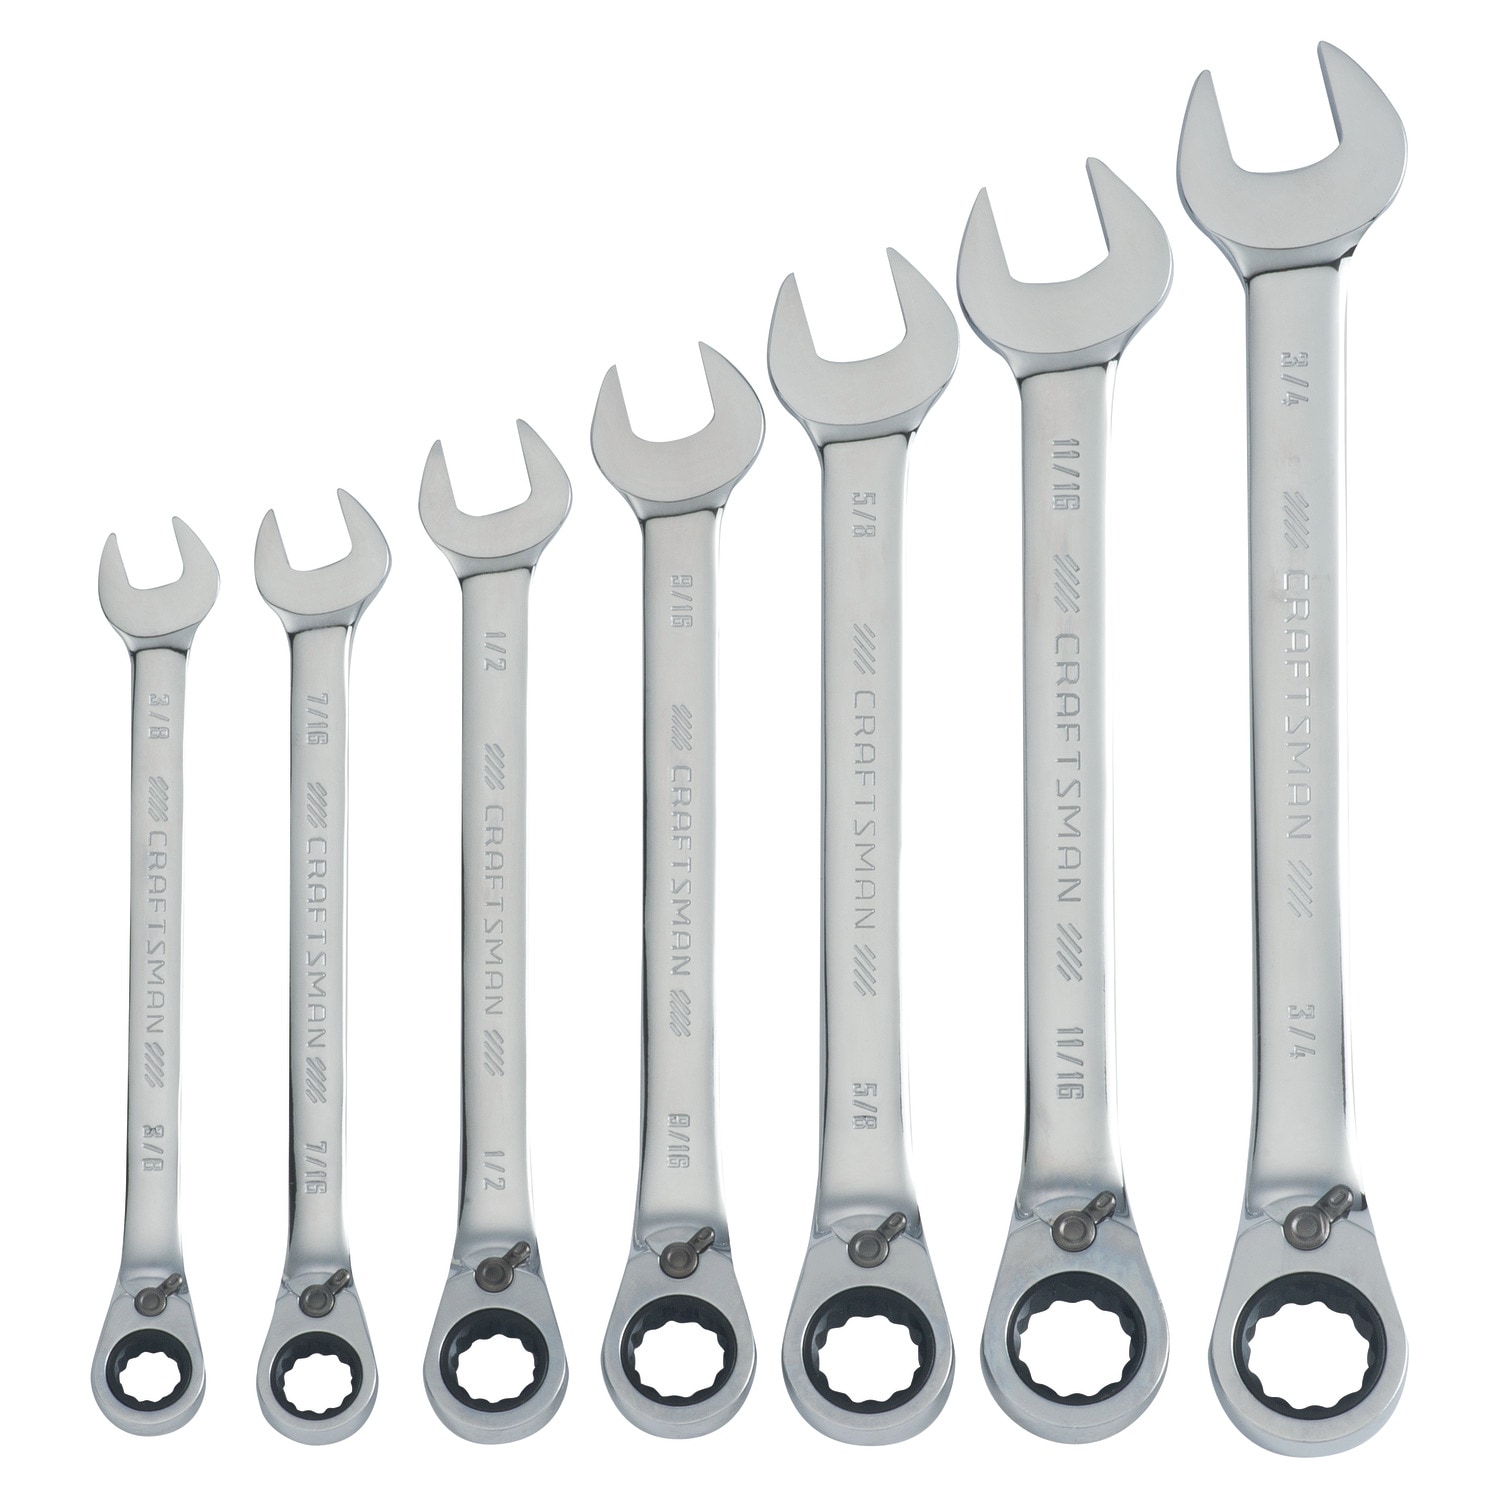 CRAFTSMAN Ratchet Wrenches & Sets at Lowes.com